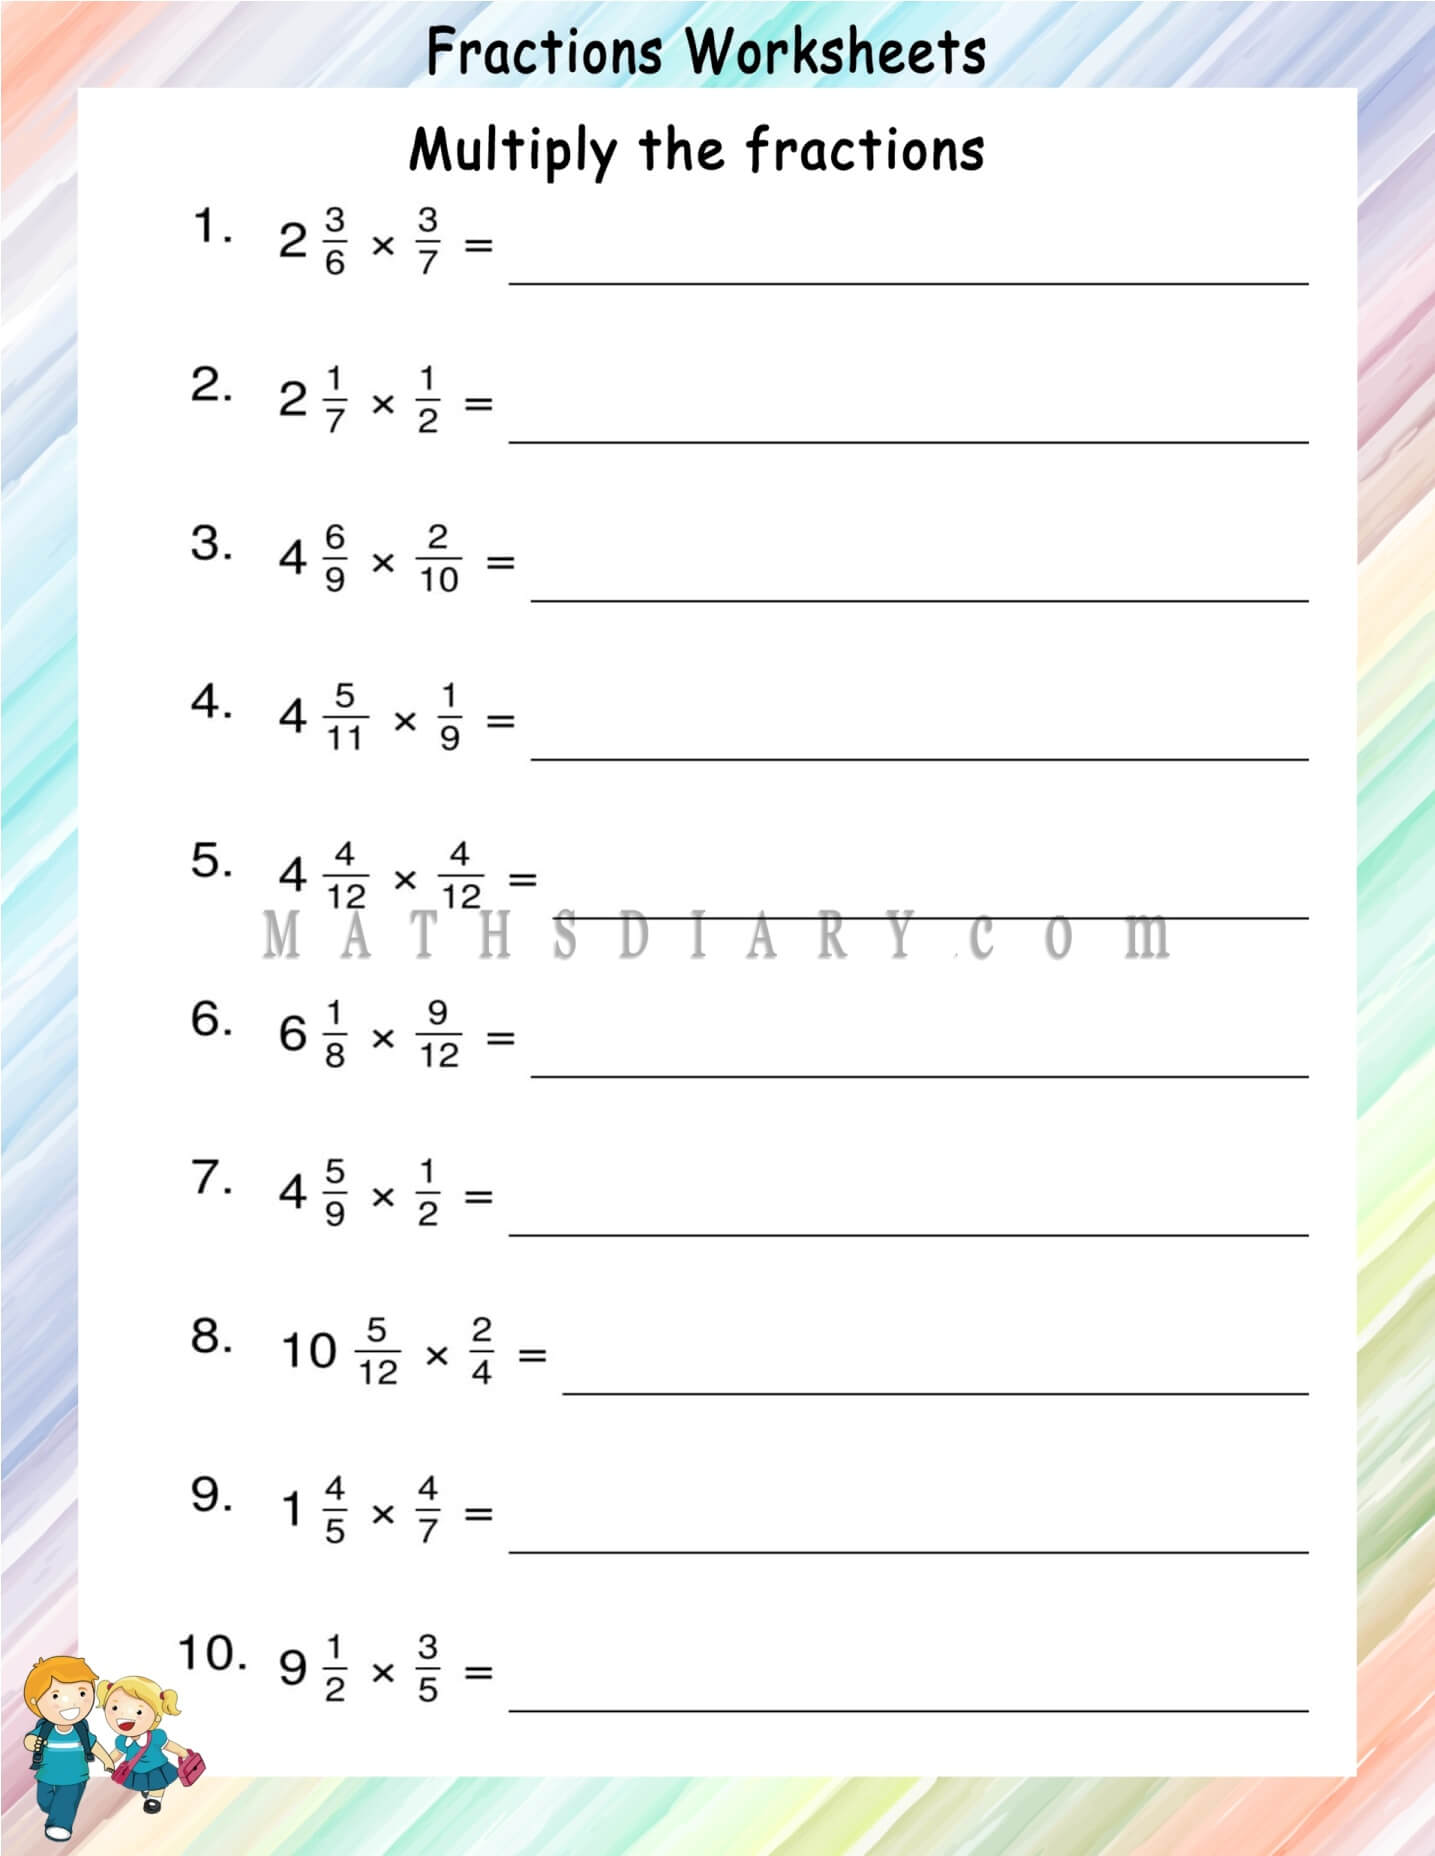 Multiplying mixed fractions by proper fractions worksheets - Math Within Multiplying Mixed Fractions Worksheet